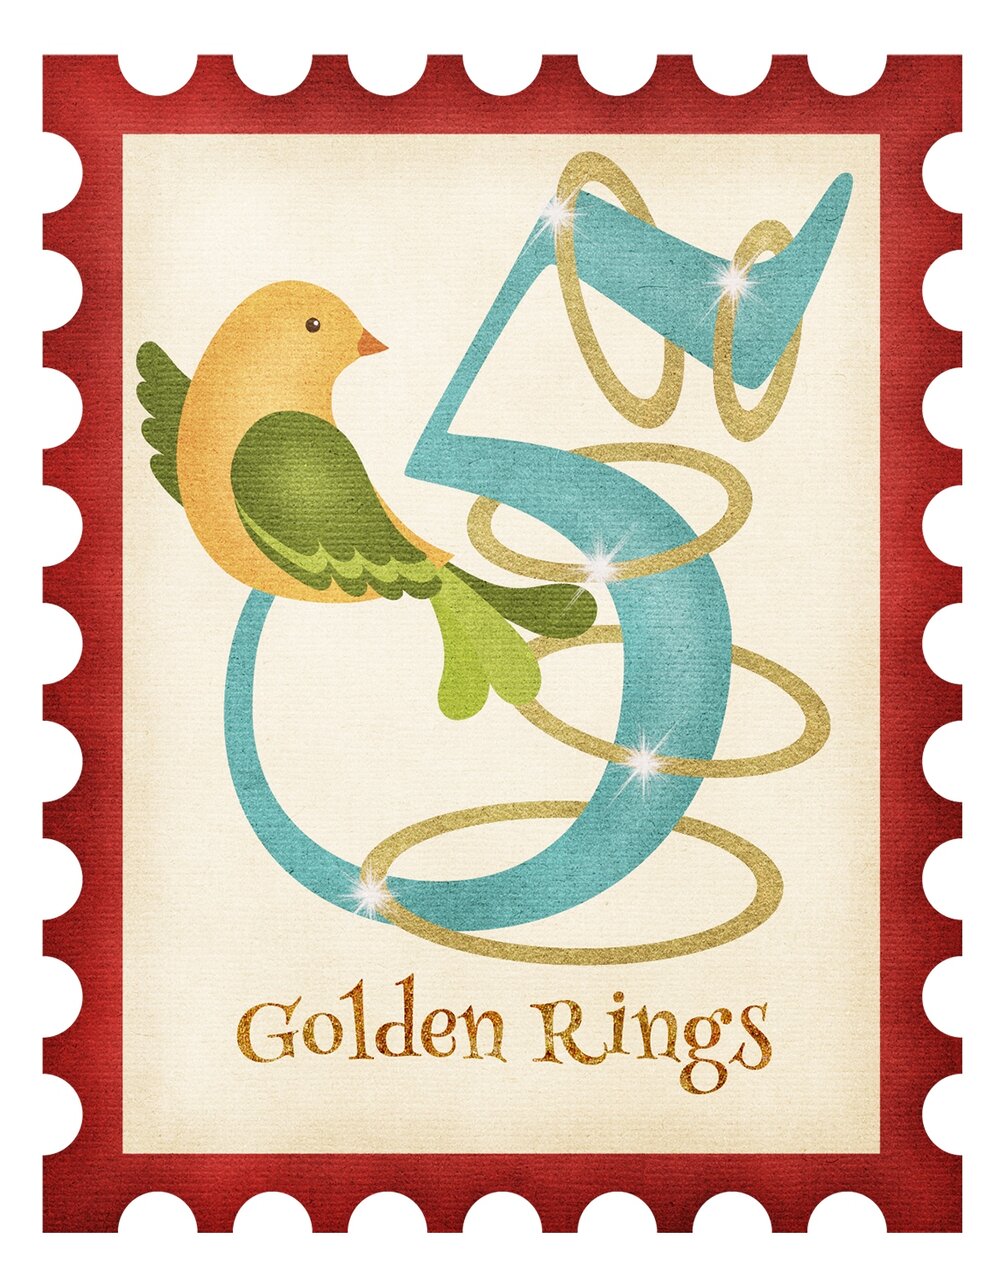 Day 5 of 12 Days of Christmas: Five Gold Rings